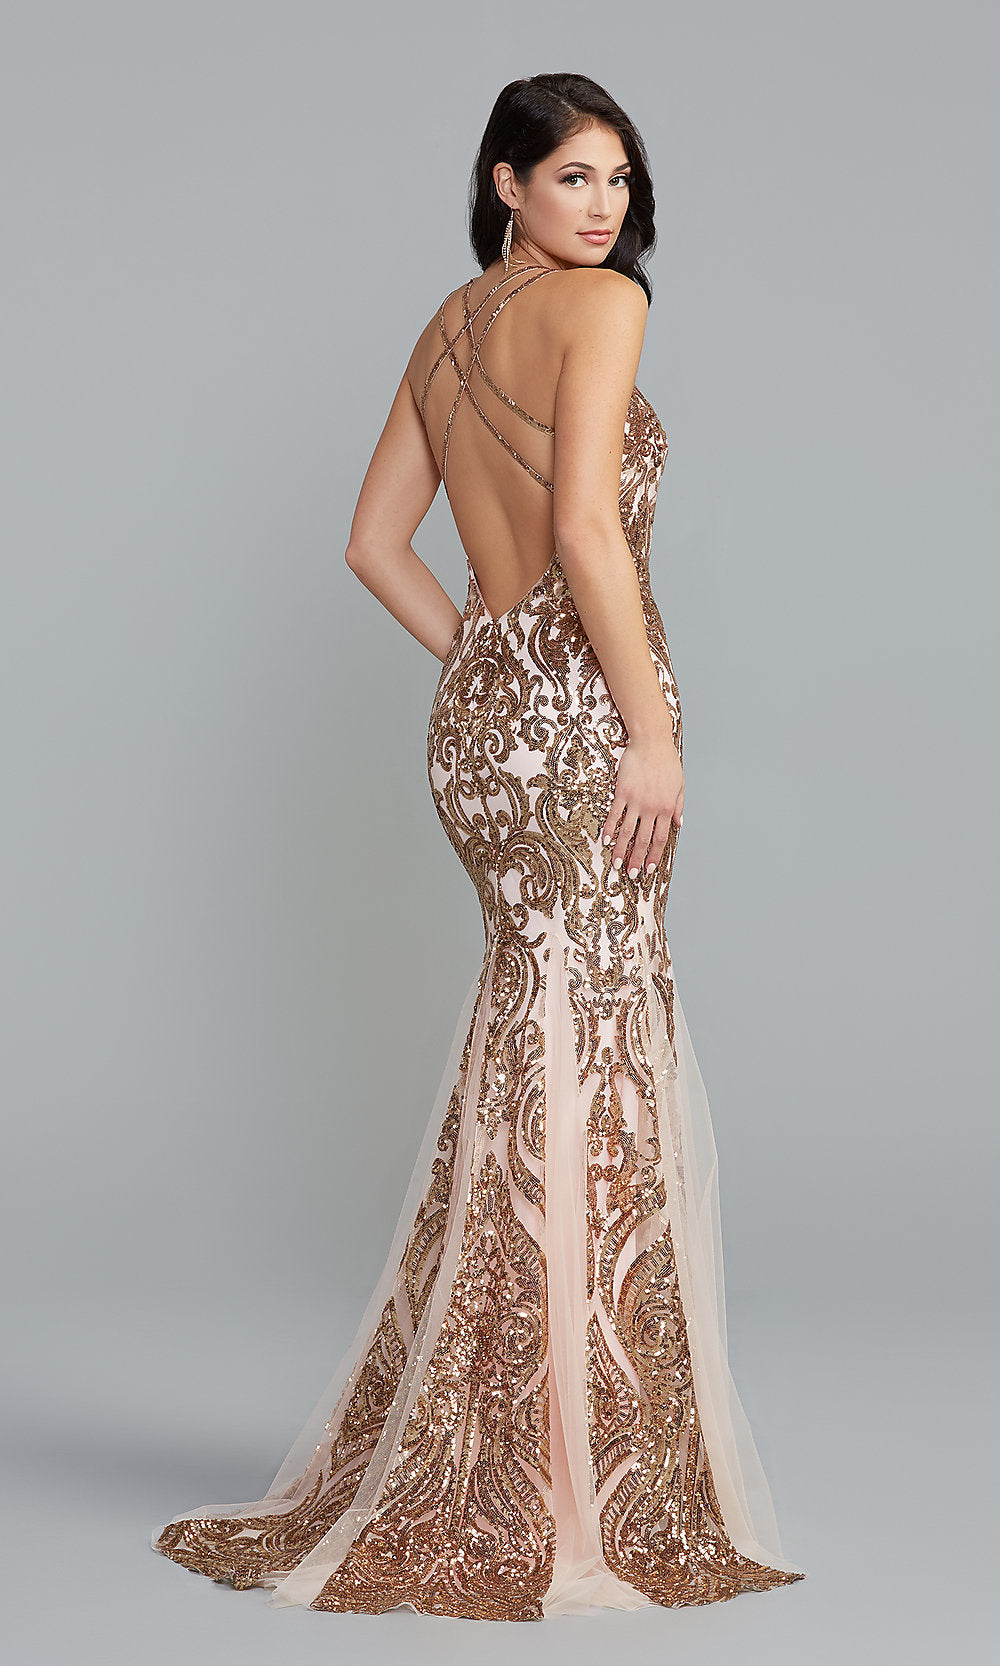  Sequin-Print Long Prom Dress with Strappy Back